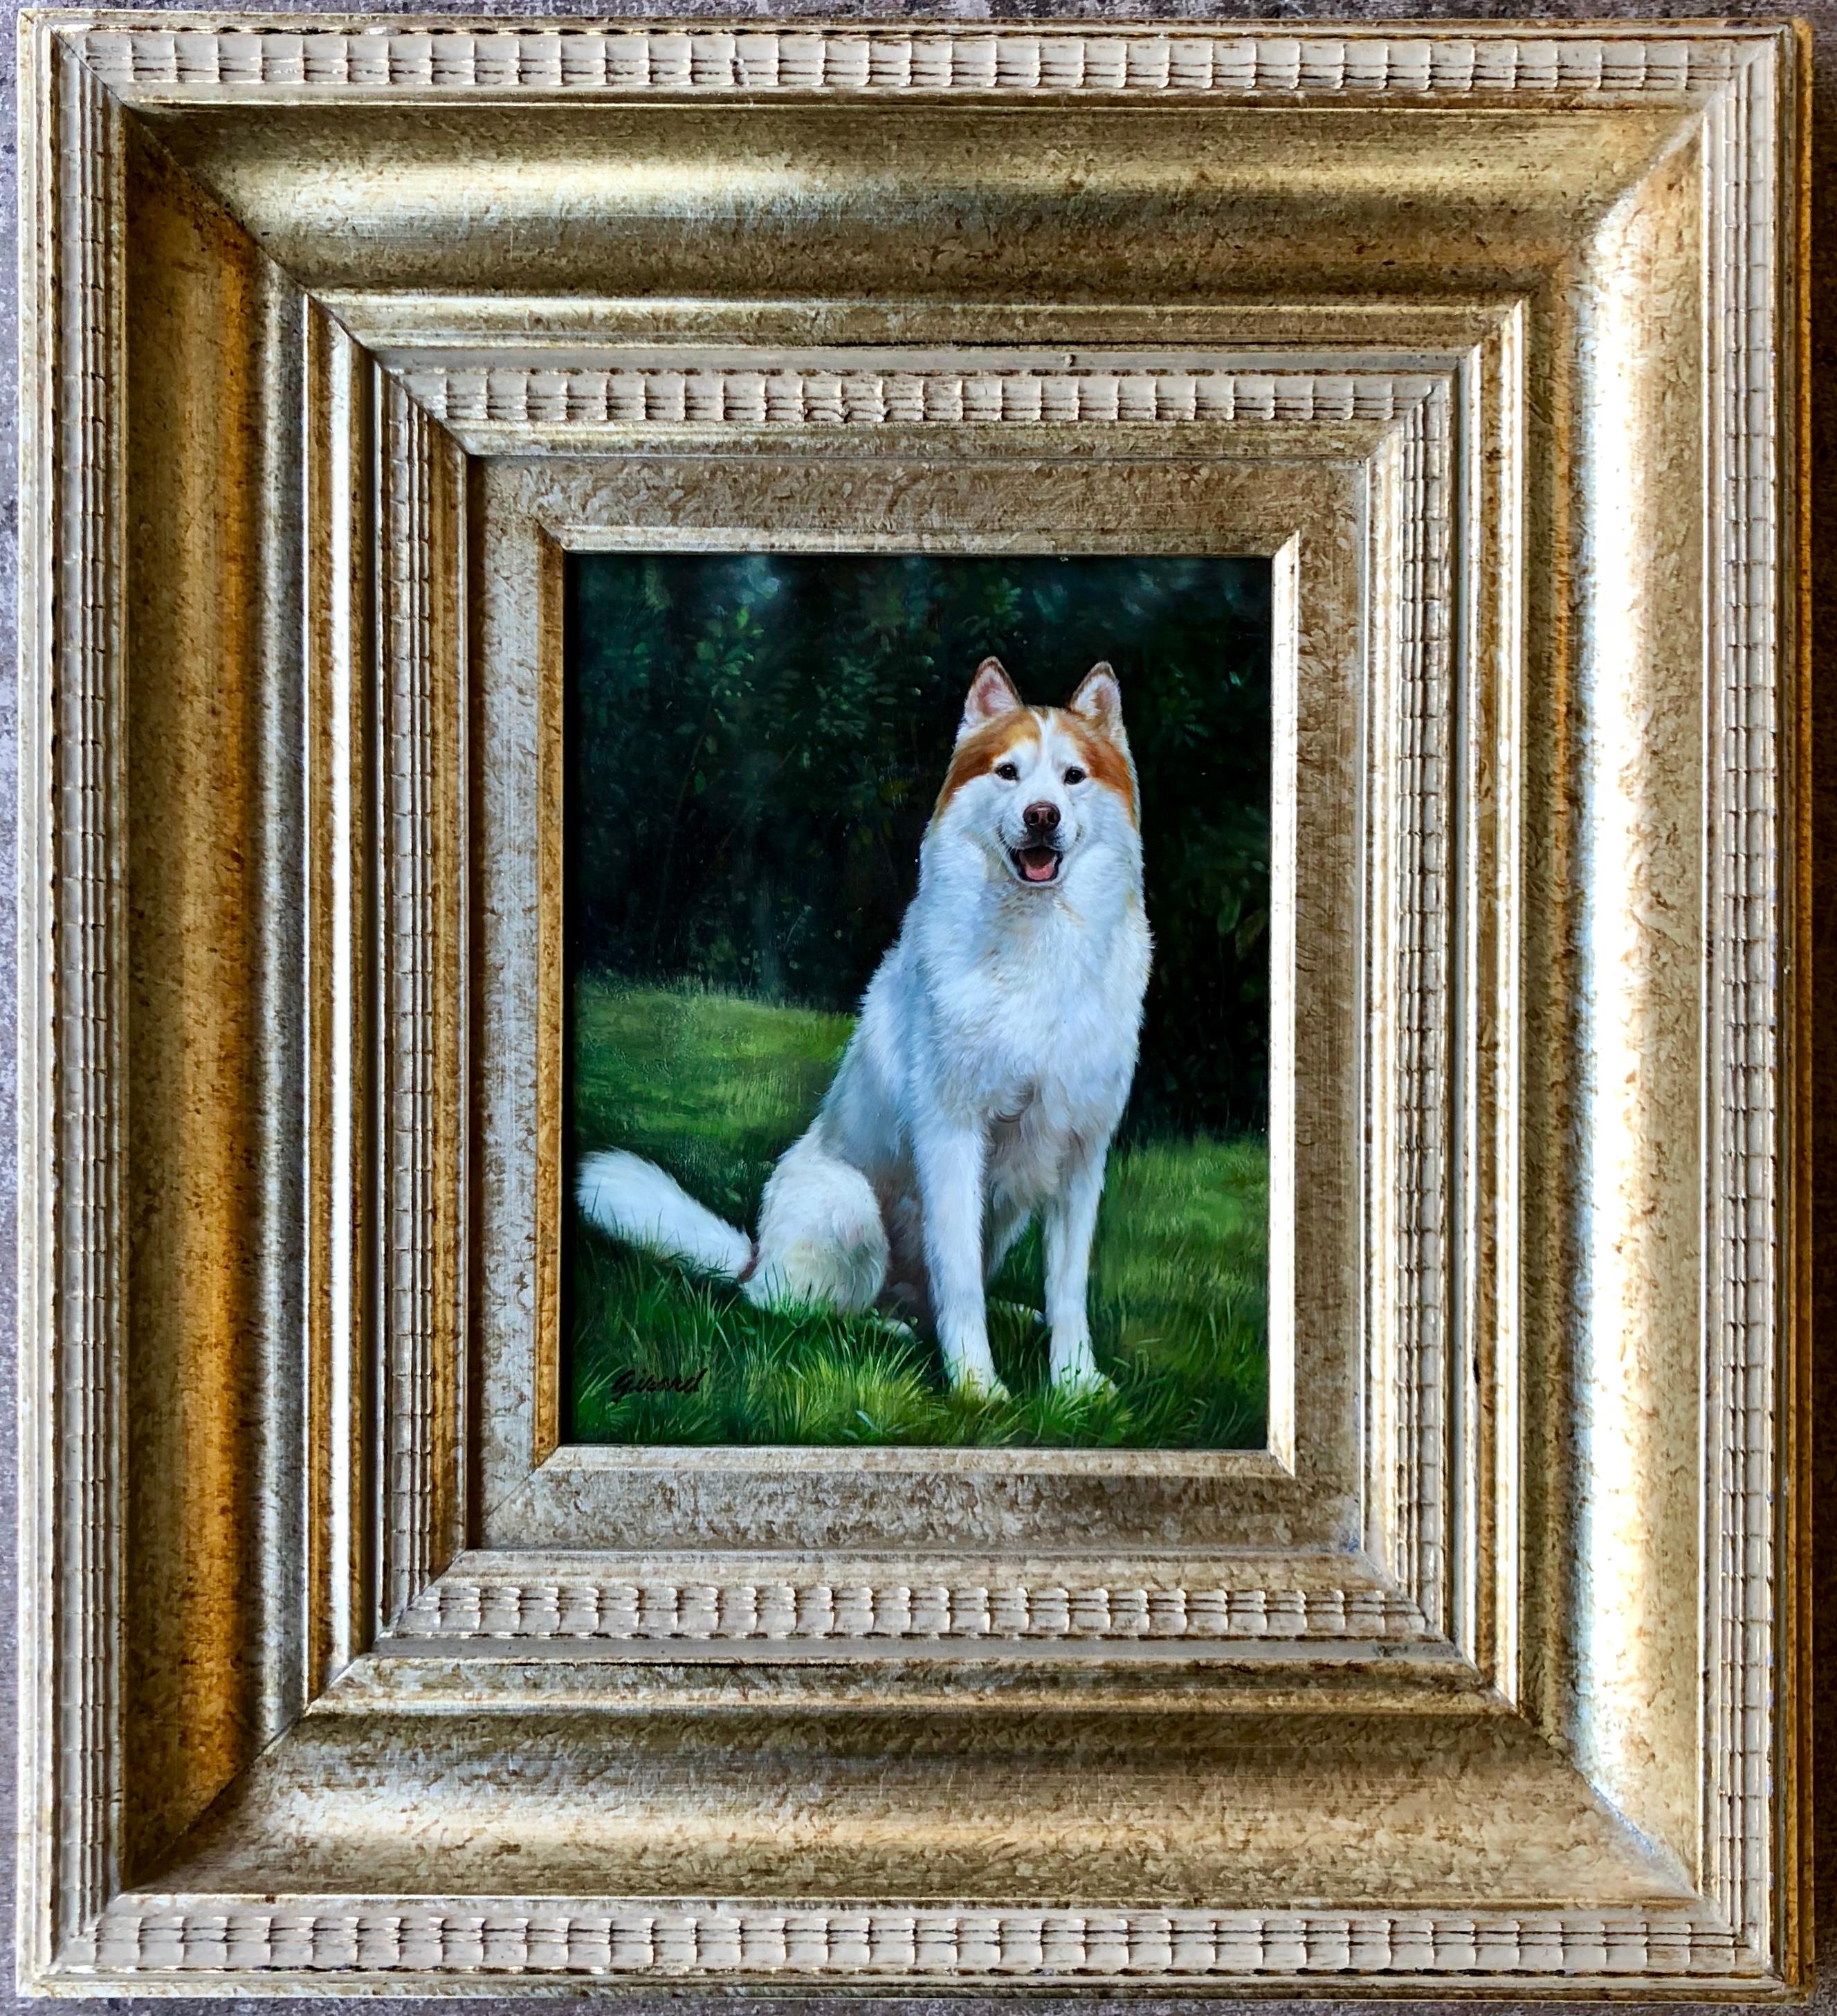 Hand-Painted Excellent Quality Original Oil Painting of a Husky Dog by French Artist Girard